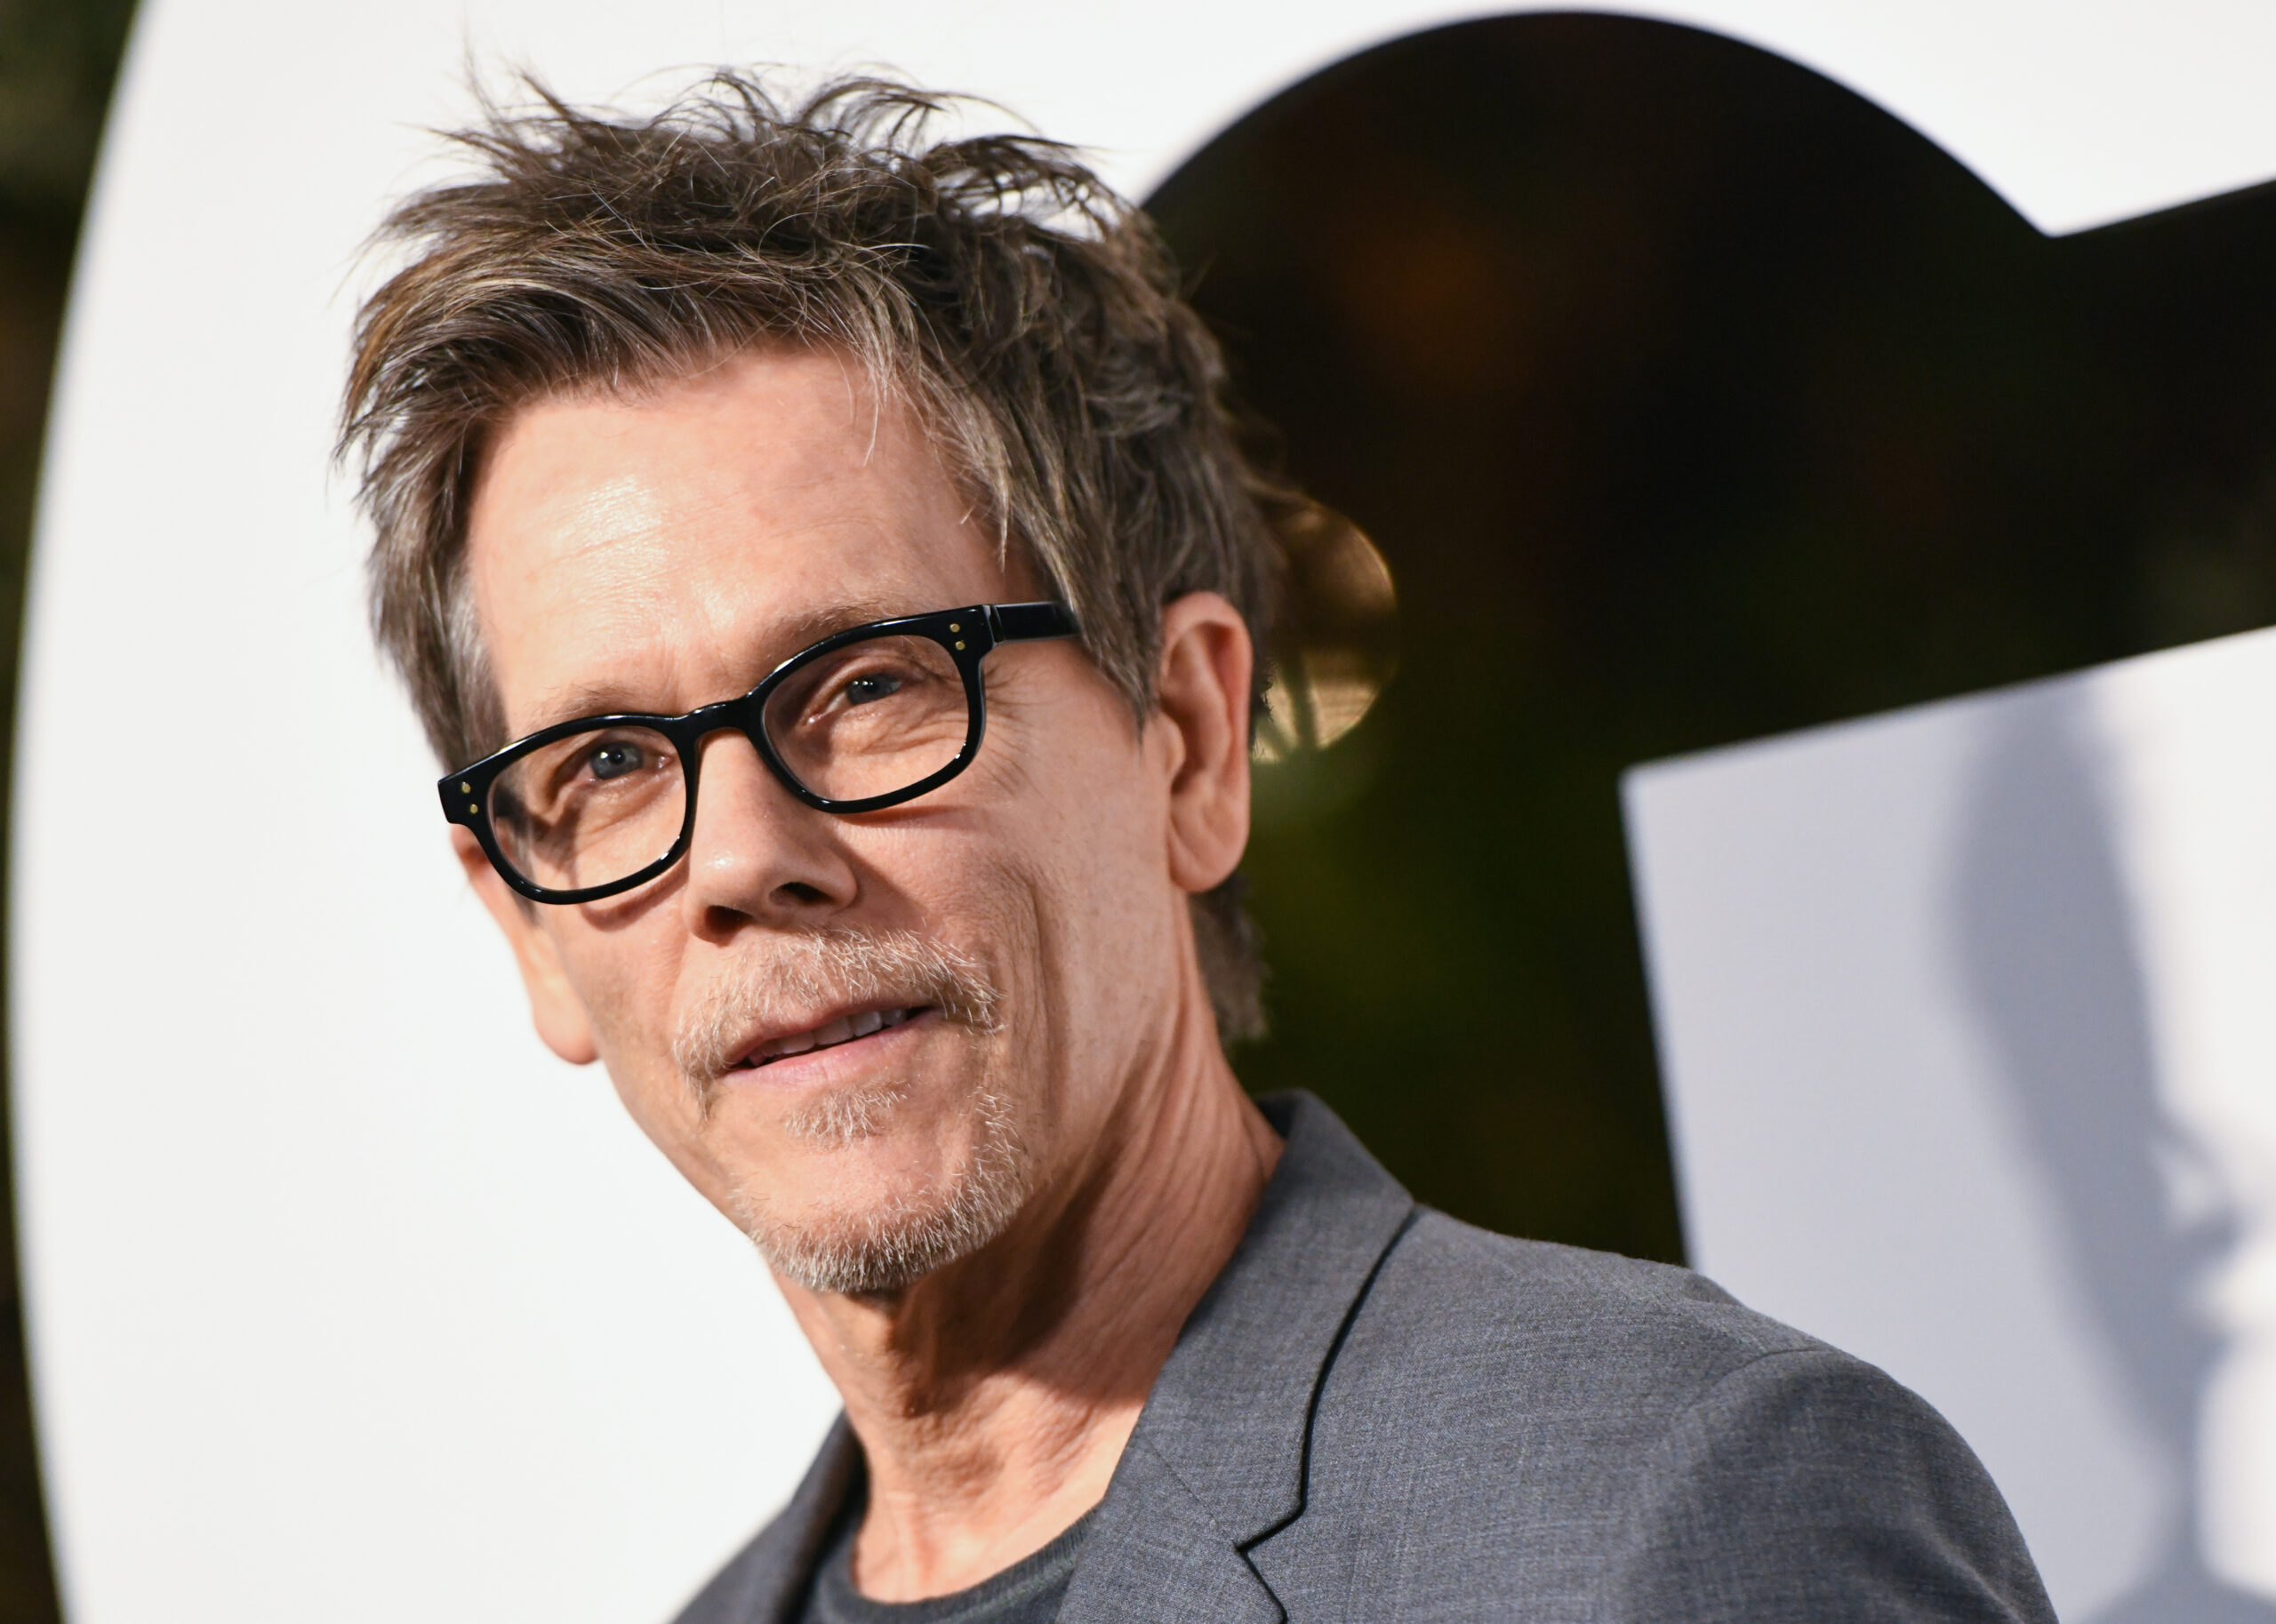 Kevin Bacon Goes Viral With Pro-Drag Video, Gets Trashed In Comments: ‘Another Virtue-Signaling Celebrity’